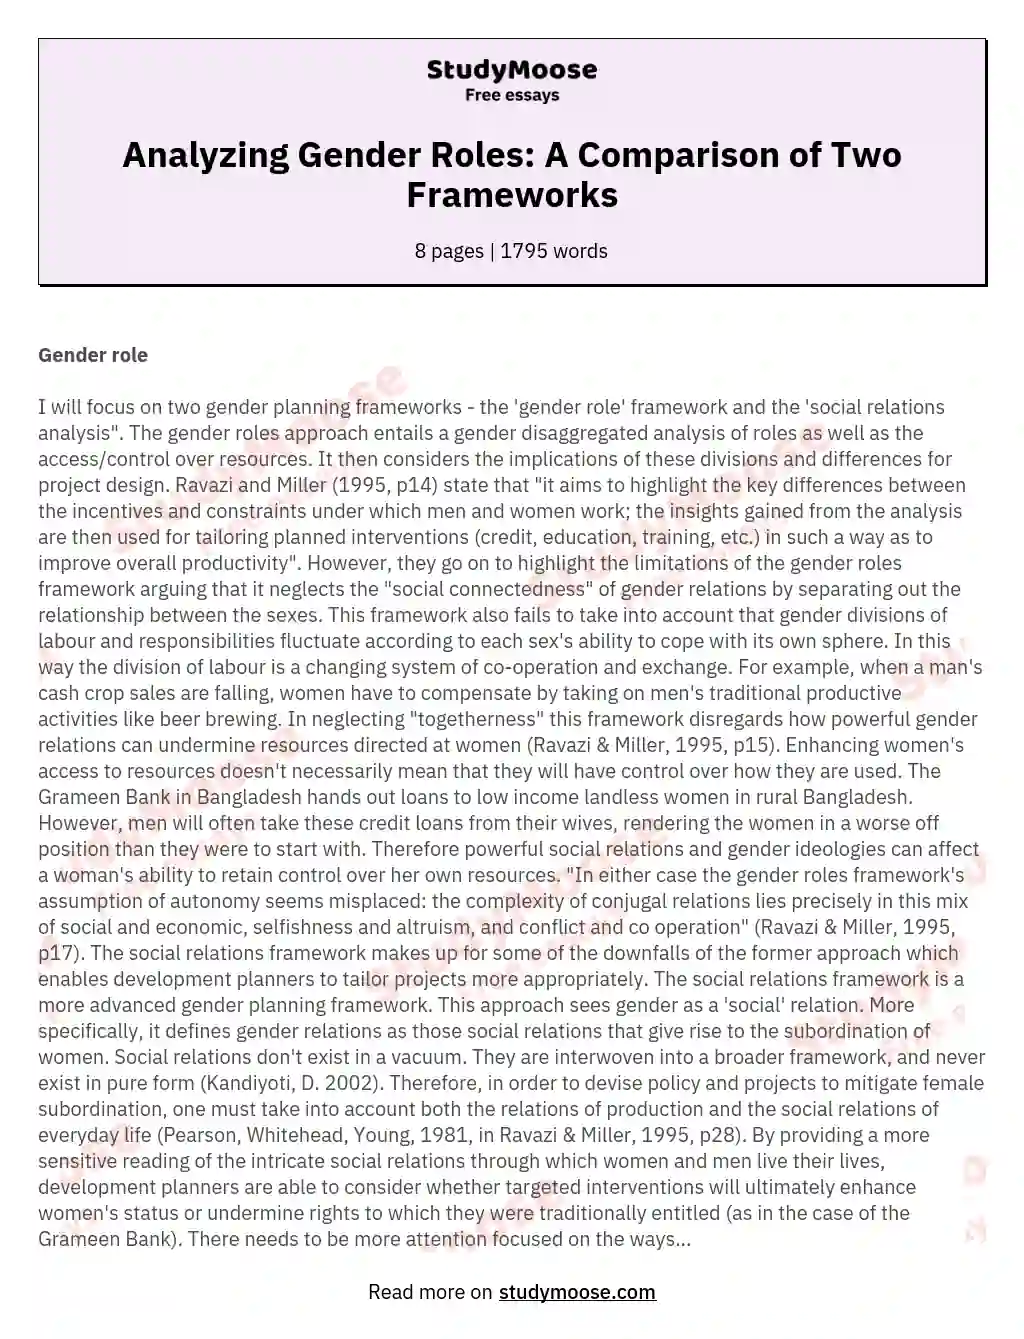 Analyzing Gender Roles: A Comparison of Two Frameworks essay